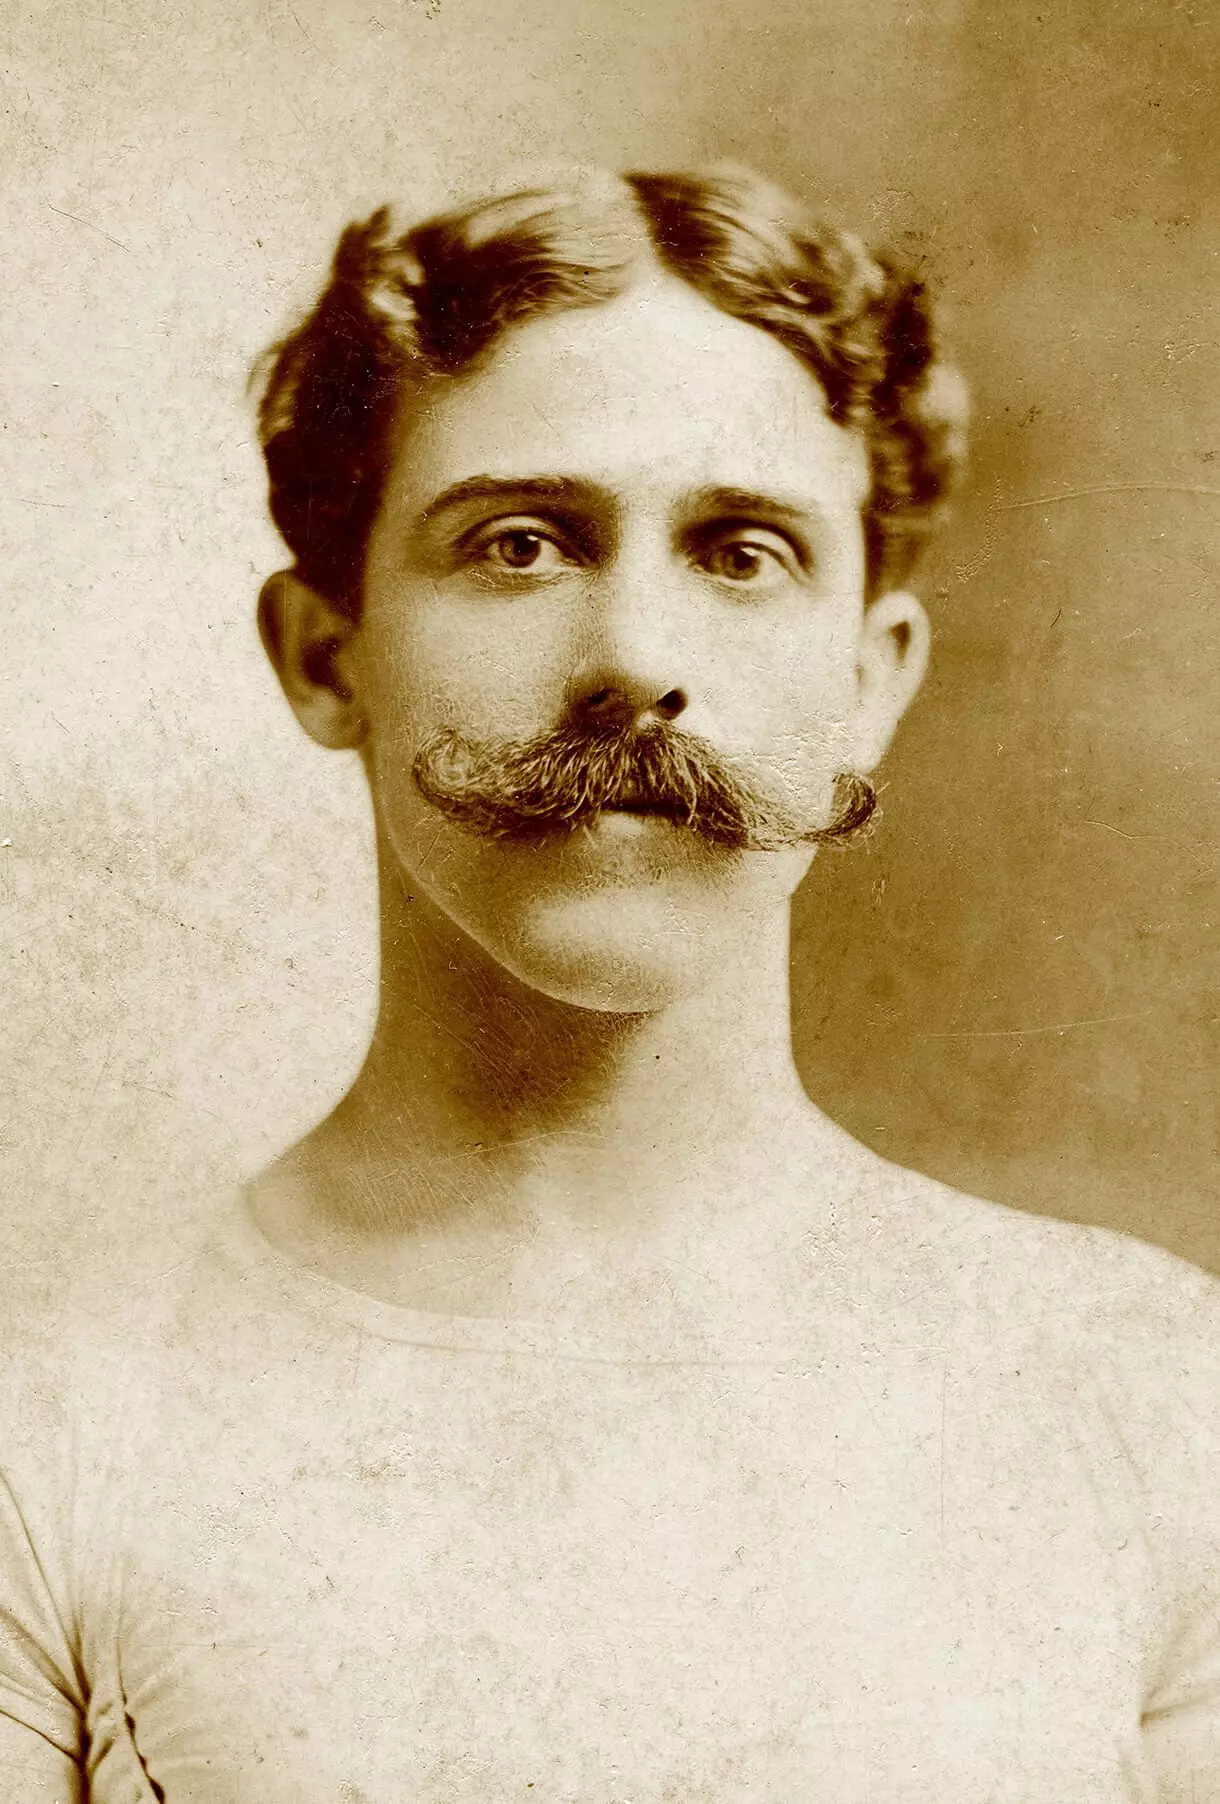 Black and white portrait of a light-skinned man with wavy dark hair parted down the middle, and a large handlebar mustache. He is wearing a very tight white shirt with no collar, possibly stretchy material.